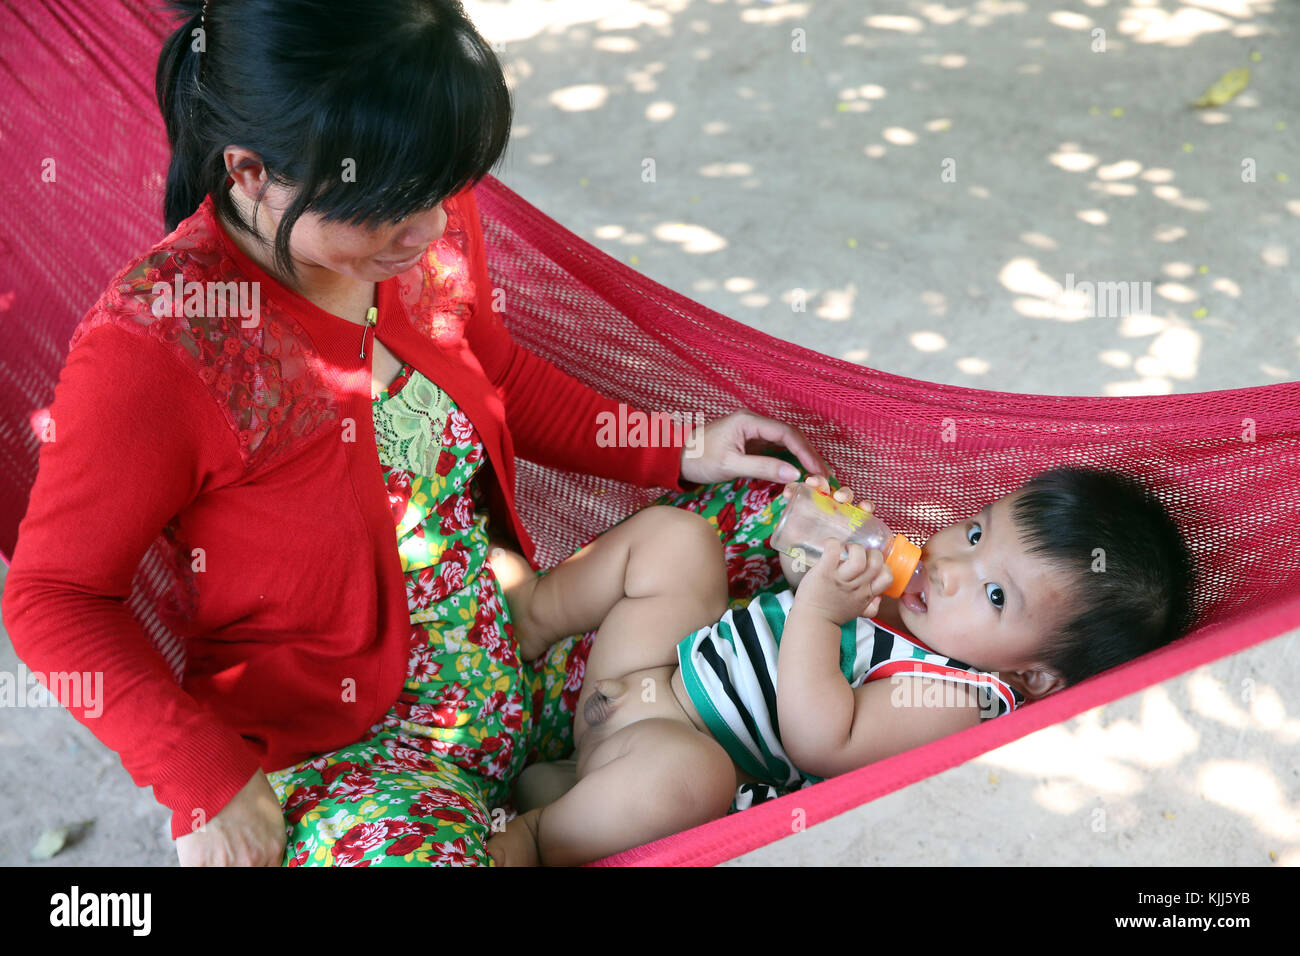 Mother and child relaxing in hammock. Thay Ninh. Vietnam. Stock Photo